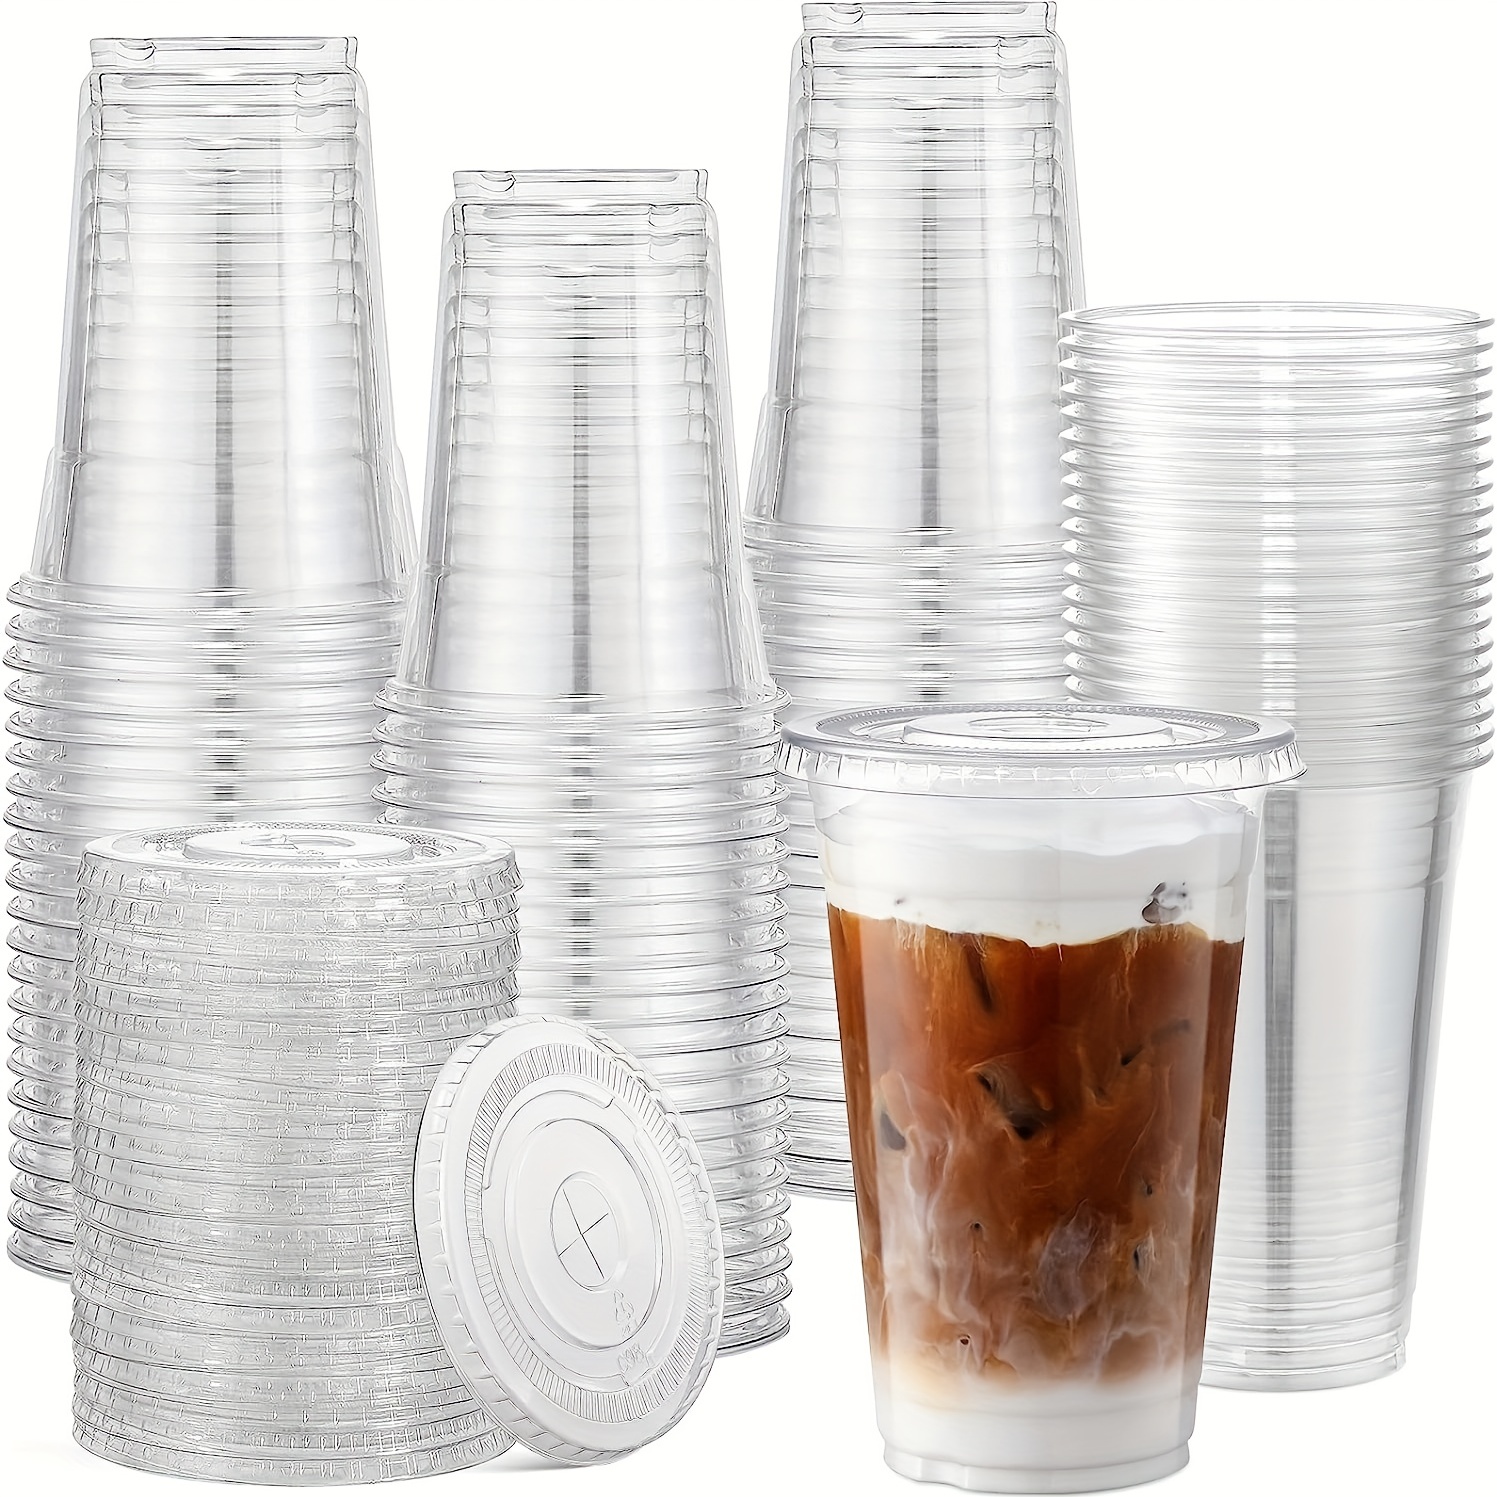 https://img.kwcdn.com/product/clear-plastic-cups/d69d2f15w98k18-55fe4292/open/2023-08-11/1691747613224-2e13bee1fa634b77b4a7a0597727b260-goods.jpeg